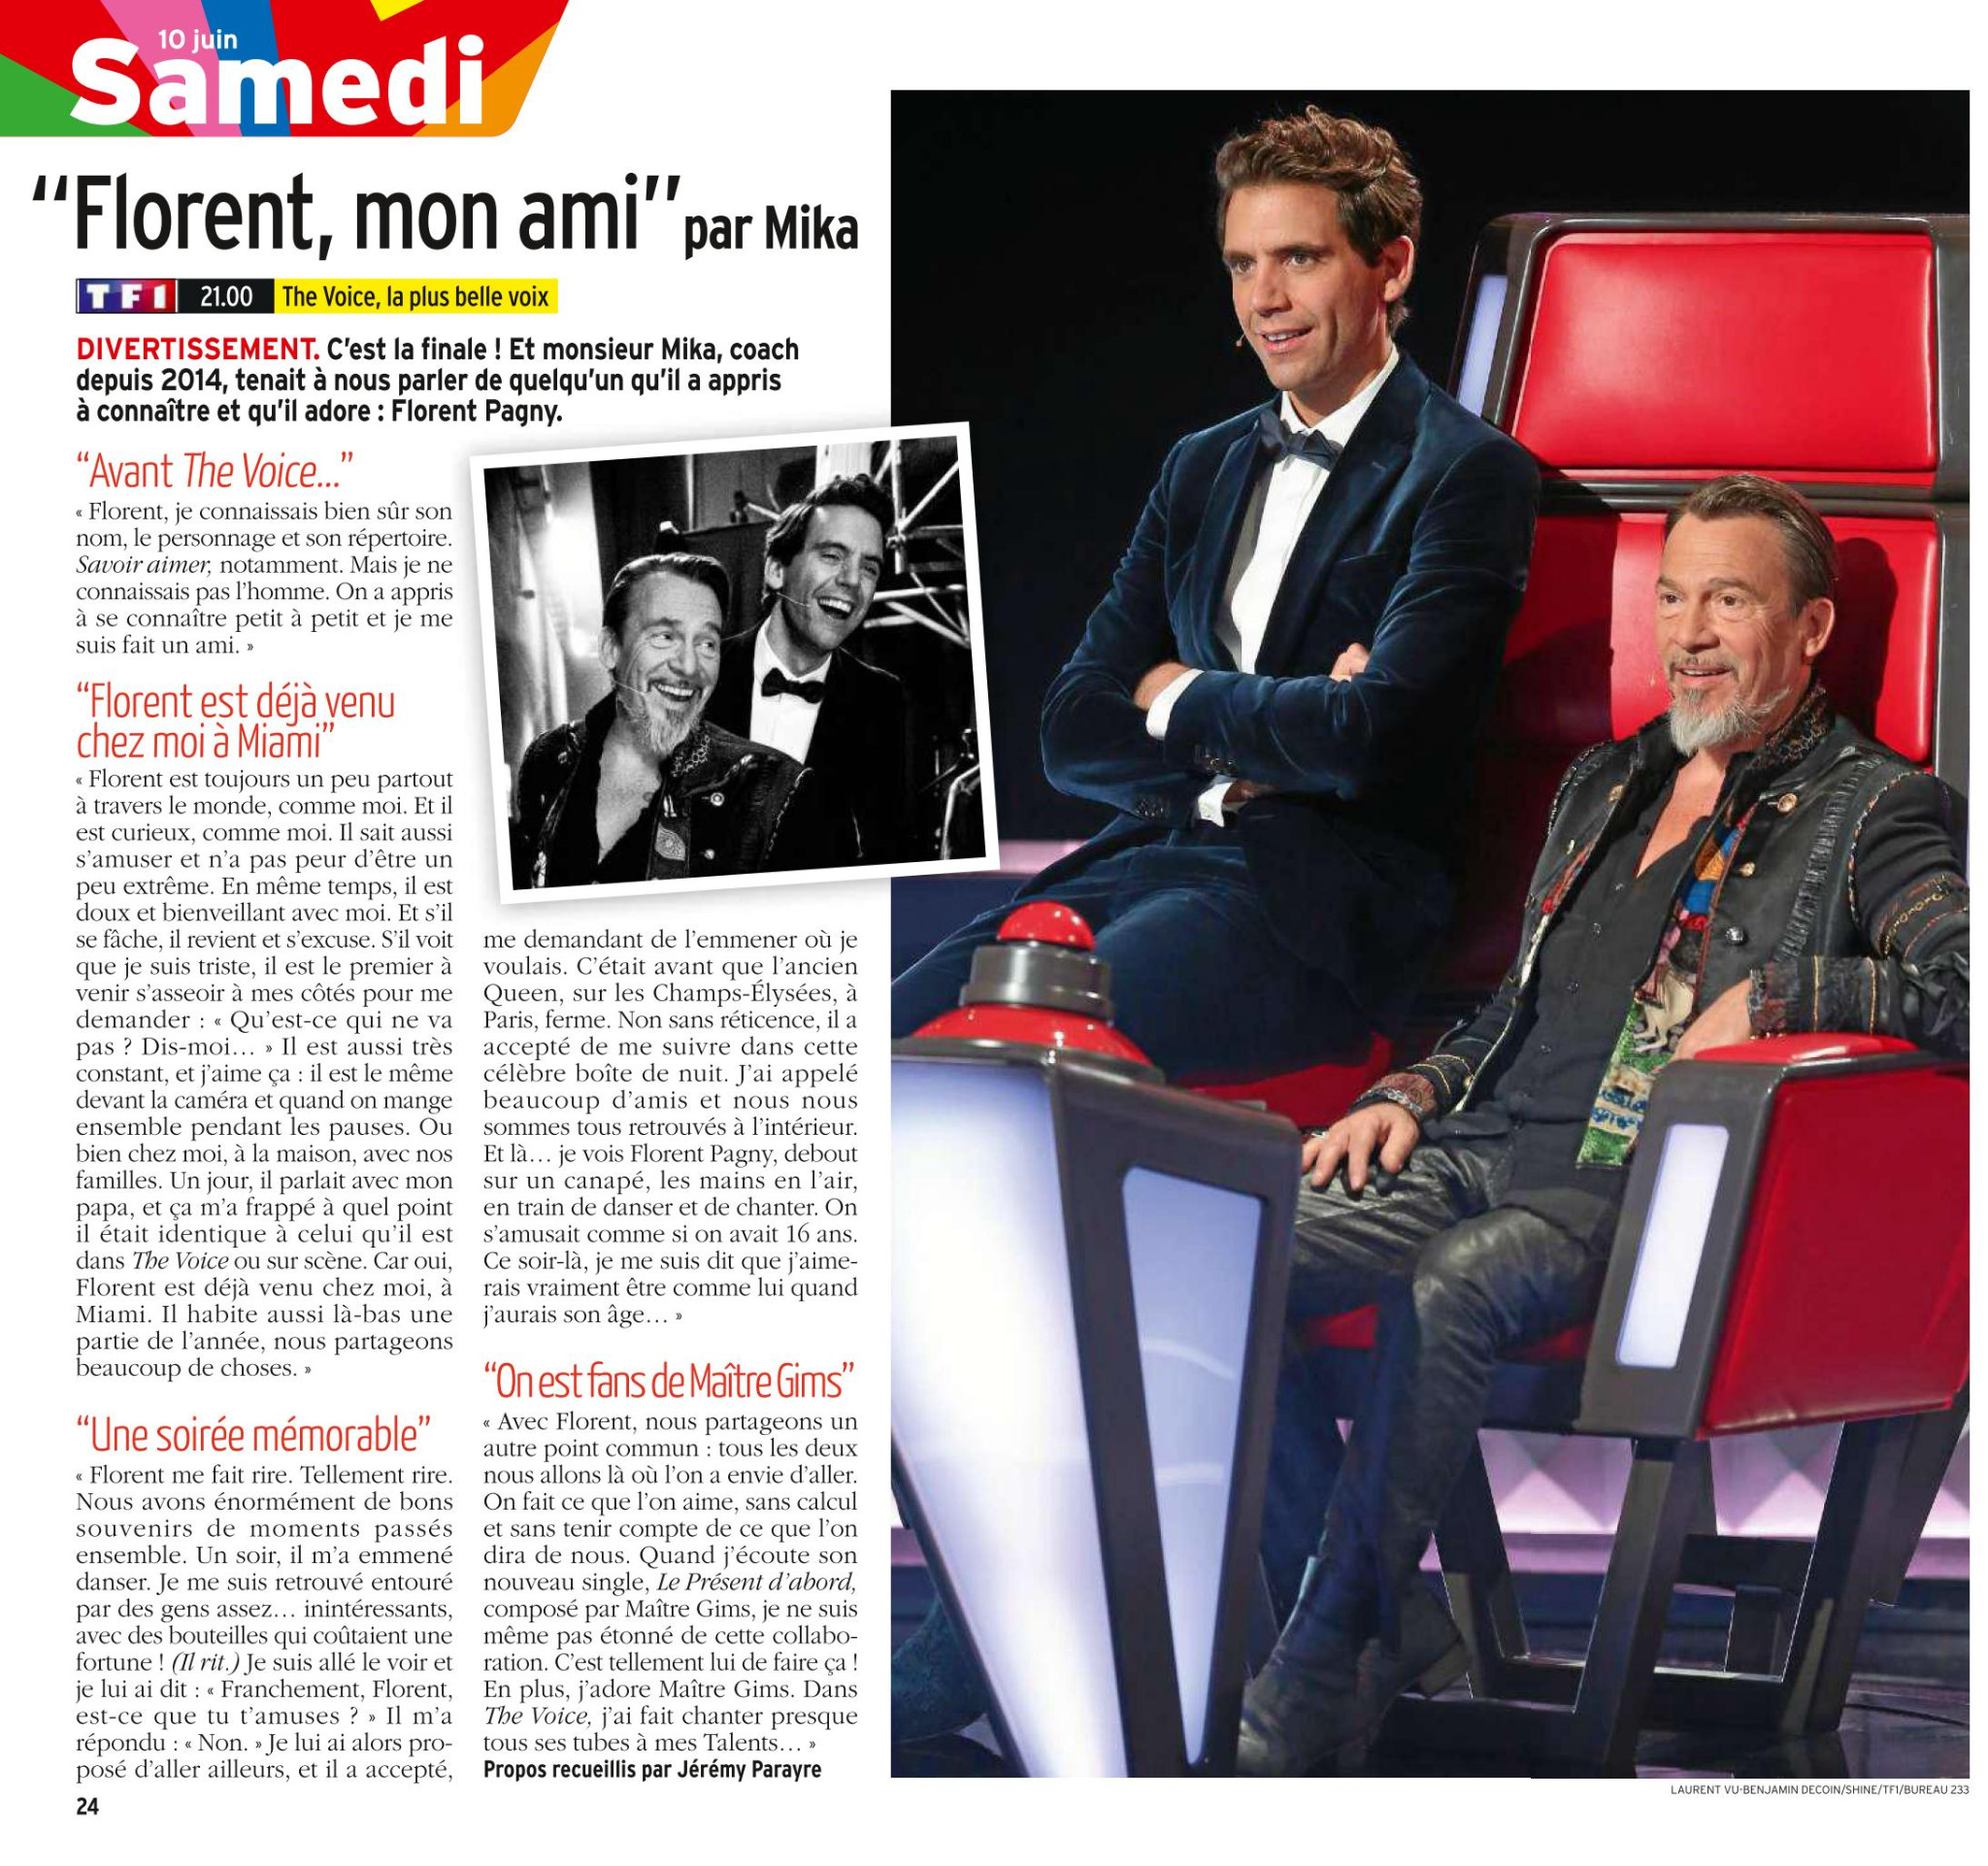 The Voice 2017 - Presse - Page 3 34885160012_c44d8705f4_o